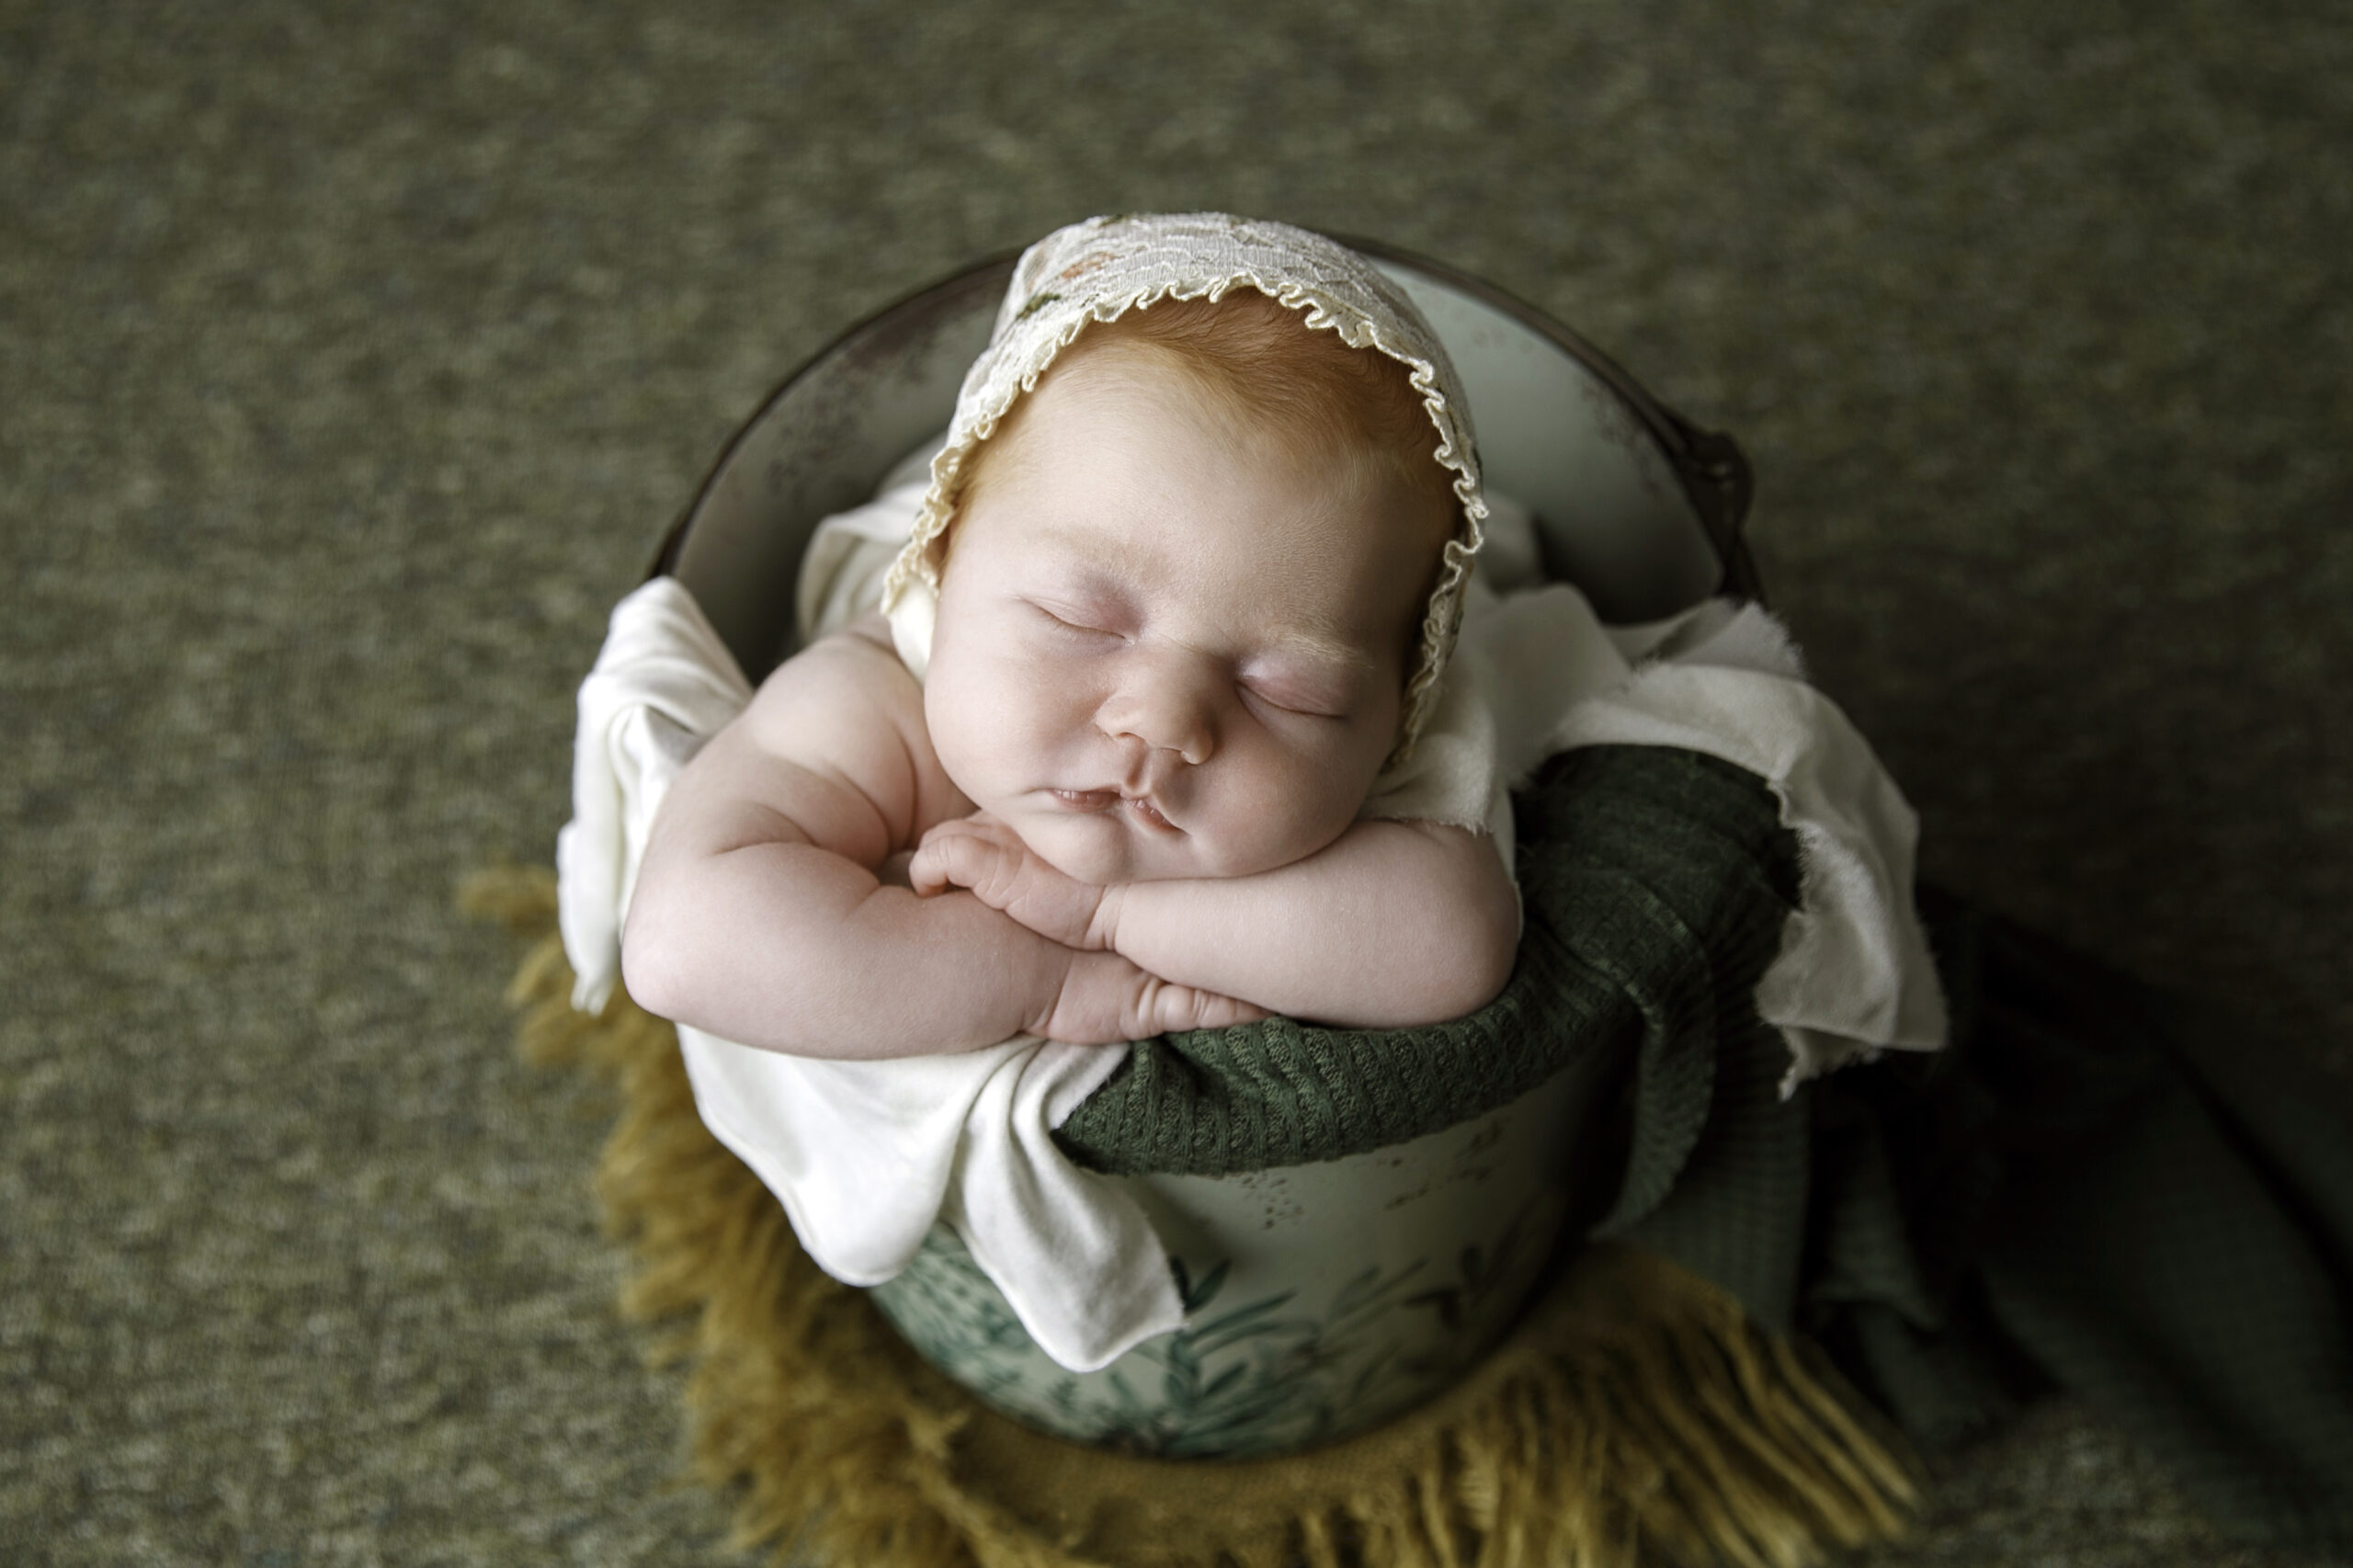 Newborn Photos of a baby girl wearing a bonnet and sleeping in a bucket